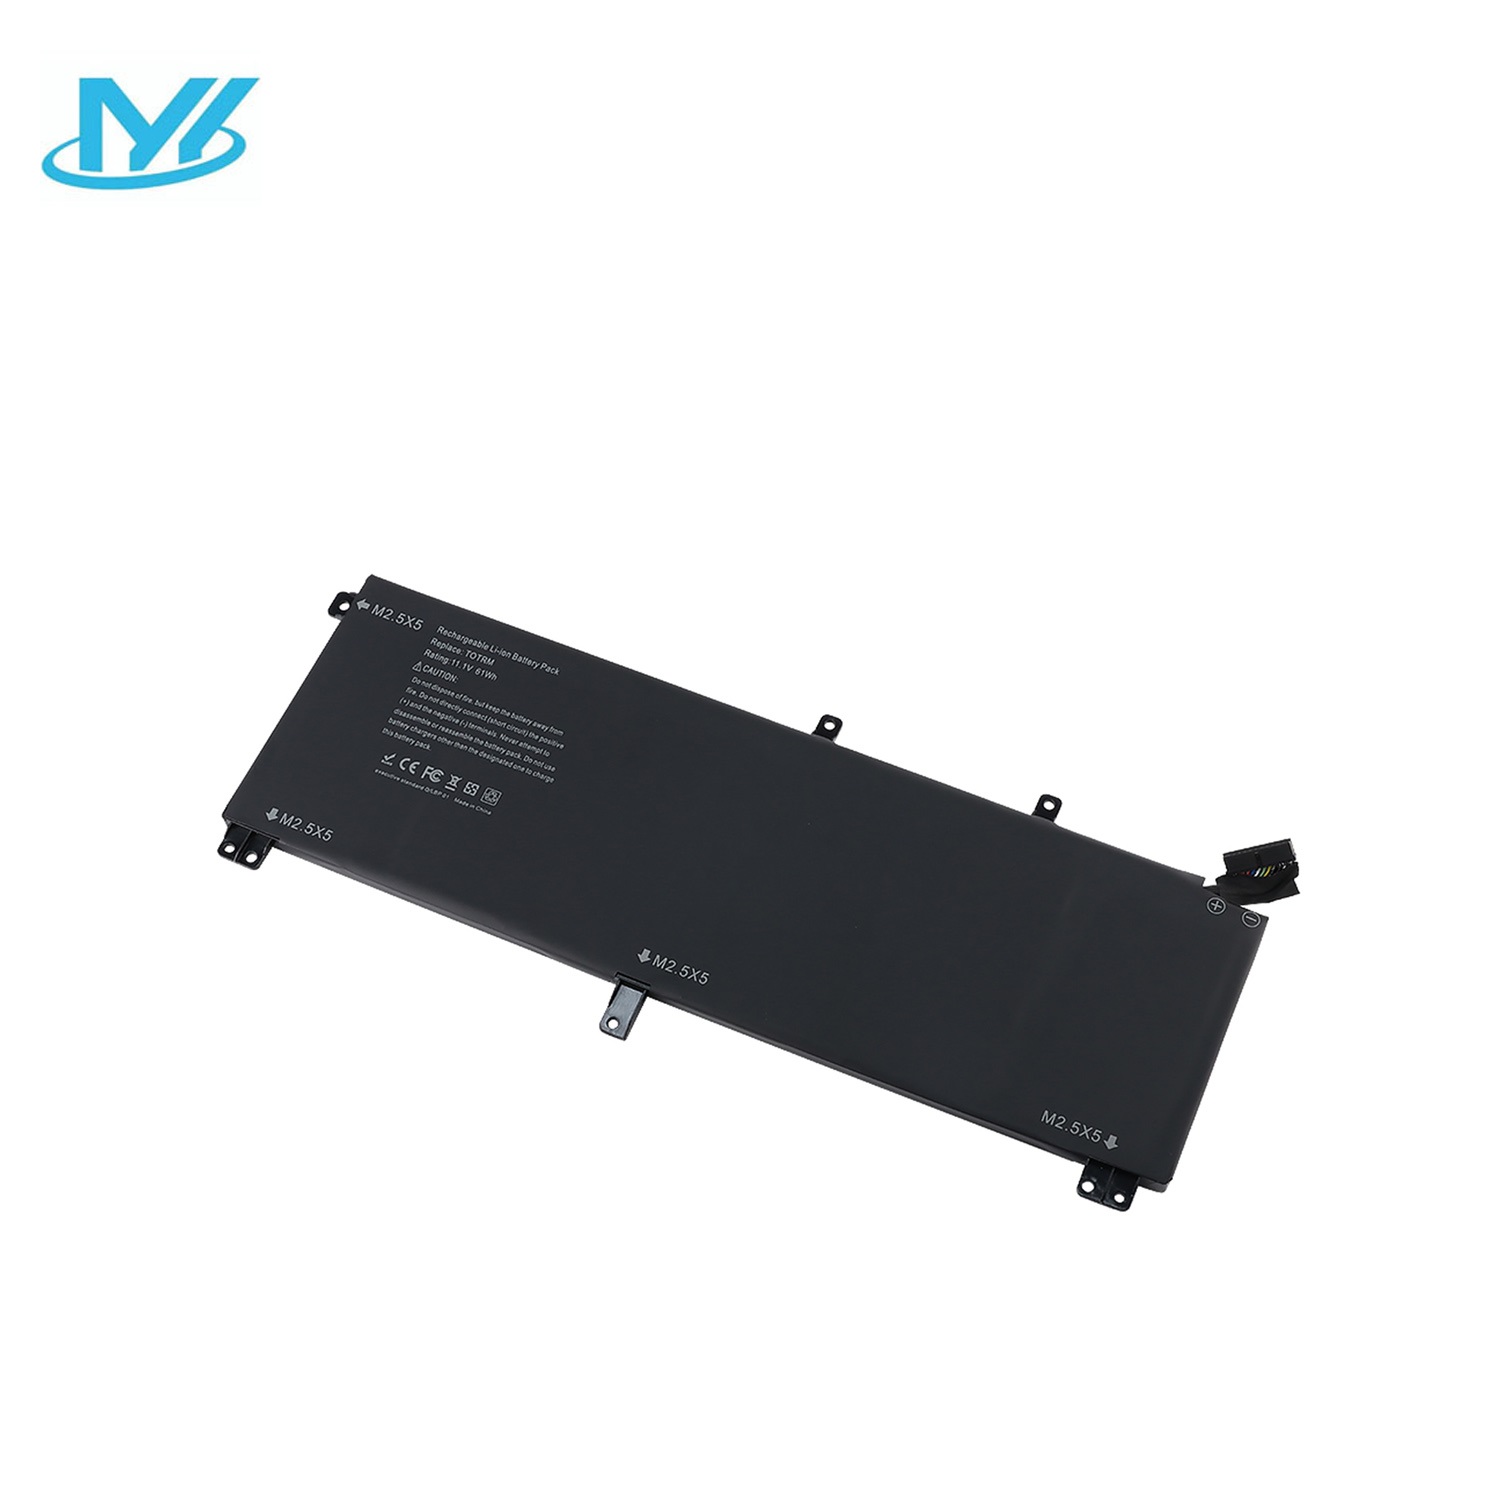 TOTRM 11.4V 8000mAh Laptop battery 245RR, 0H76MY, H76MV,07D1WJ, 7D1WJ, Y758W for Dell Laptop XPS 15 9530 M3800 Series